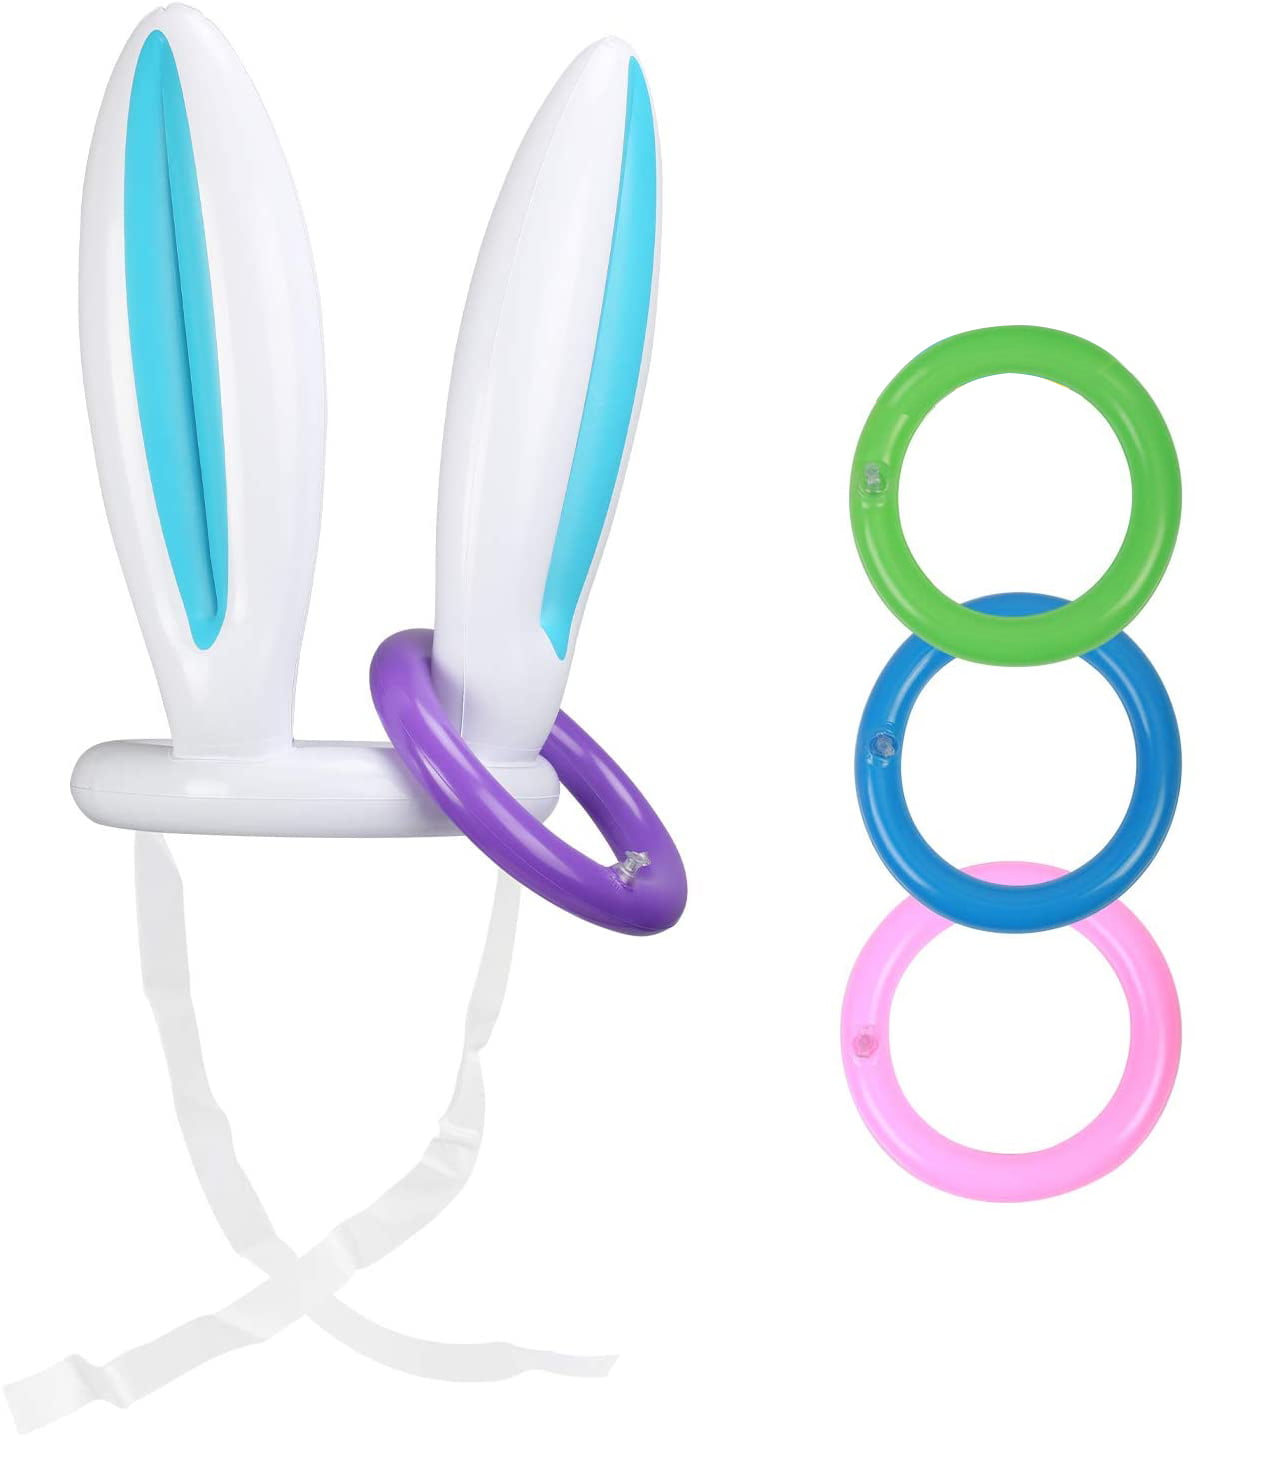 Outdoor Easter Eggs Hunt 2 Bunny Ears Hats & 8 Rings TURNMEON 2 Set of Inflatable Bunny Ring Toss Games School Carnival Party Games Easter Outdoor Party Games Party Supplies for Family & Kids